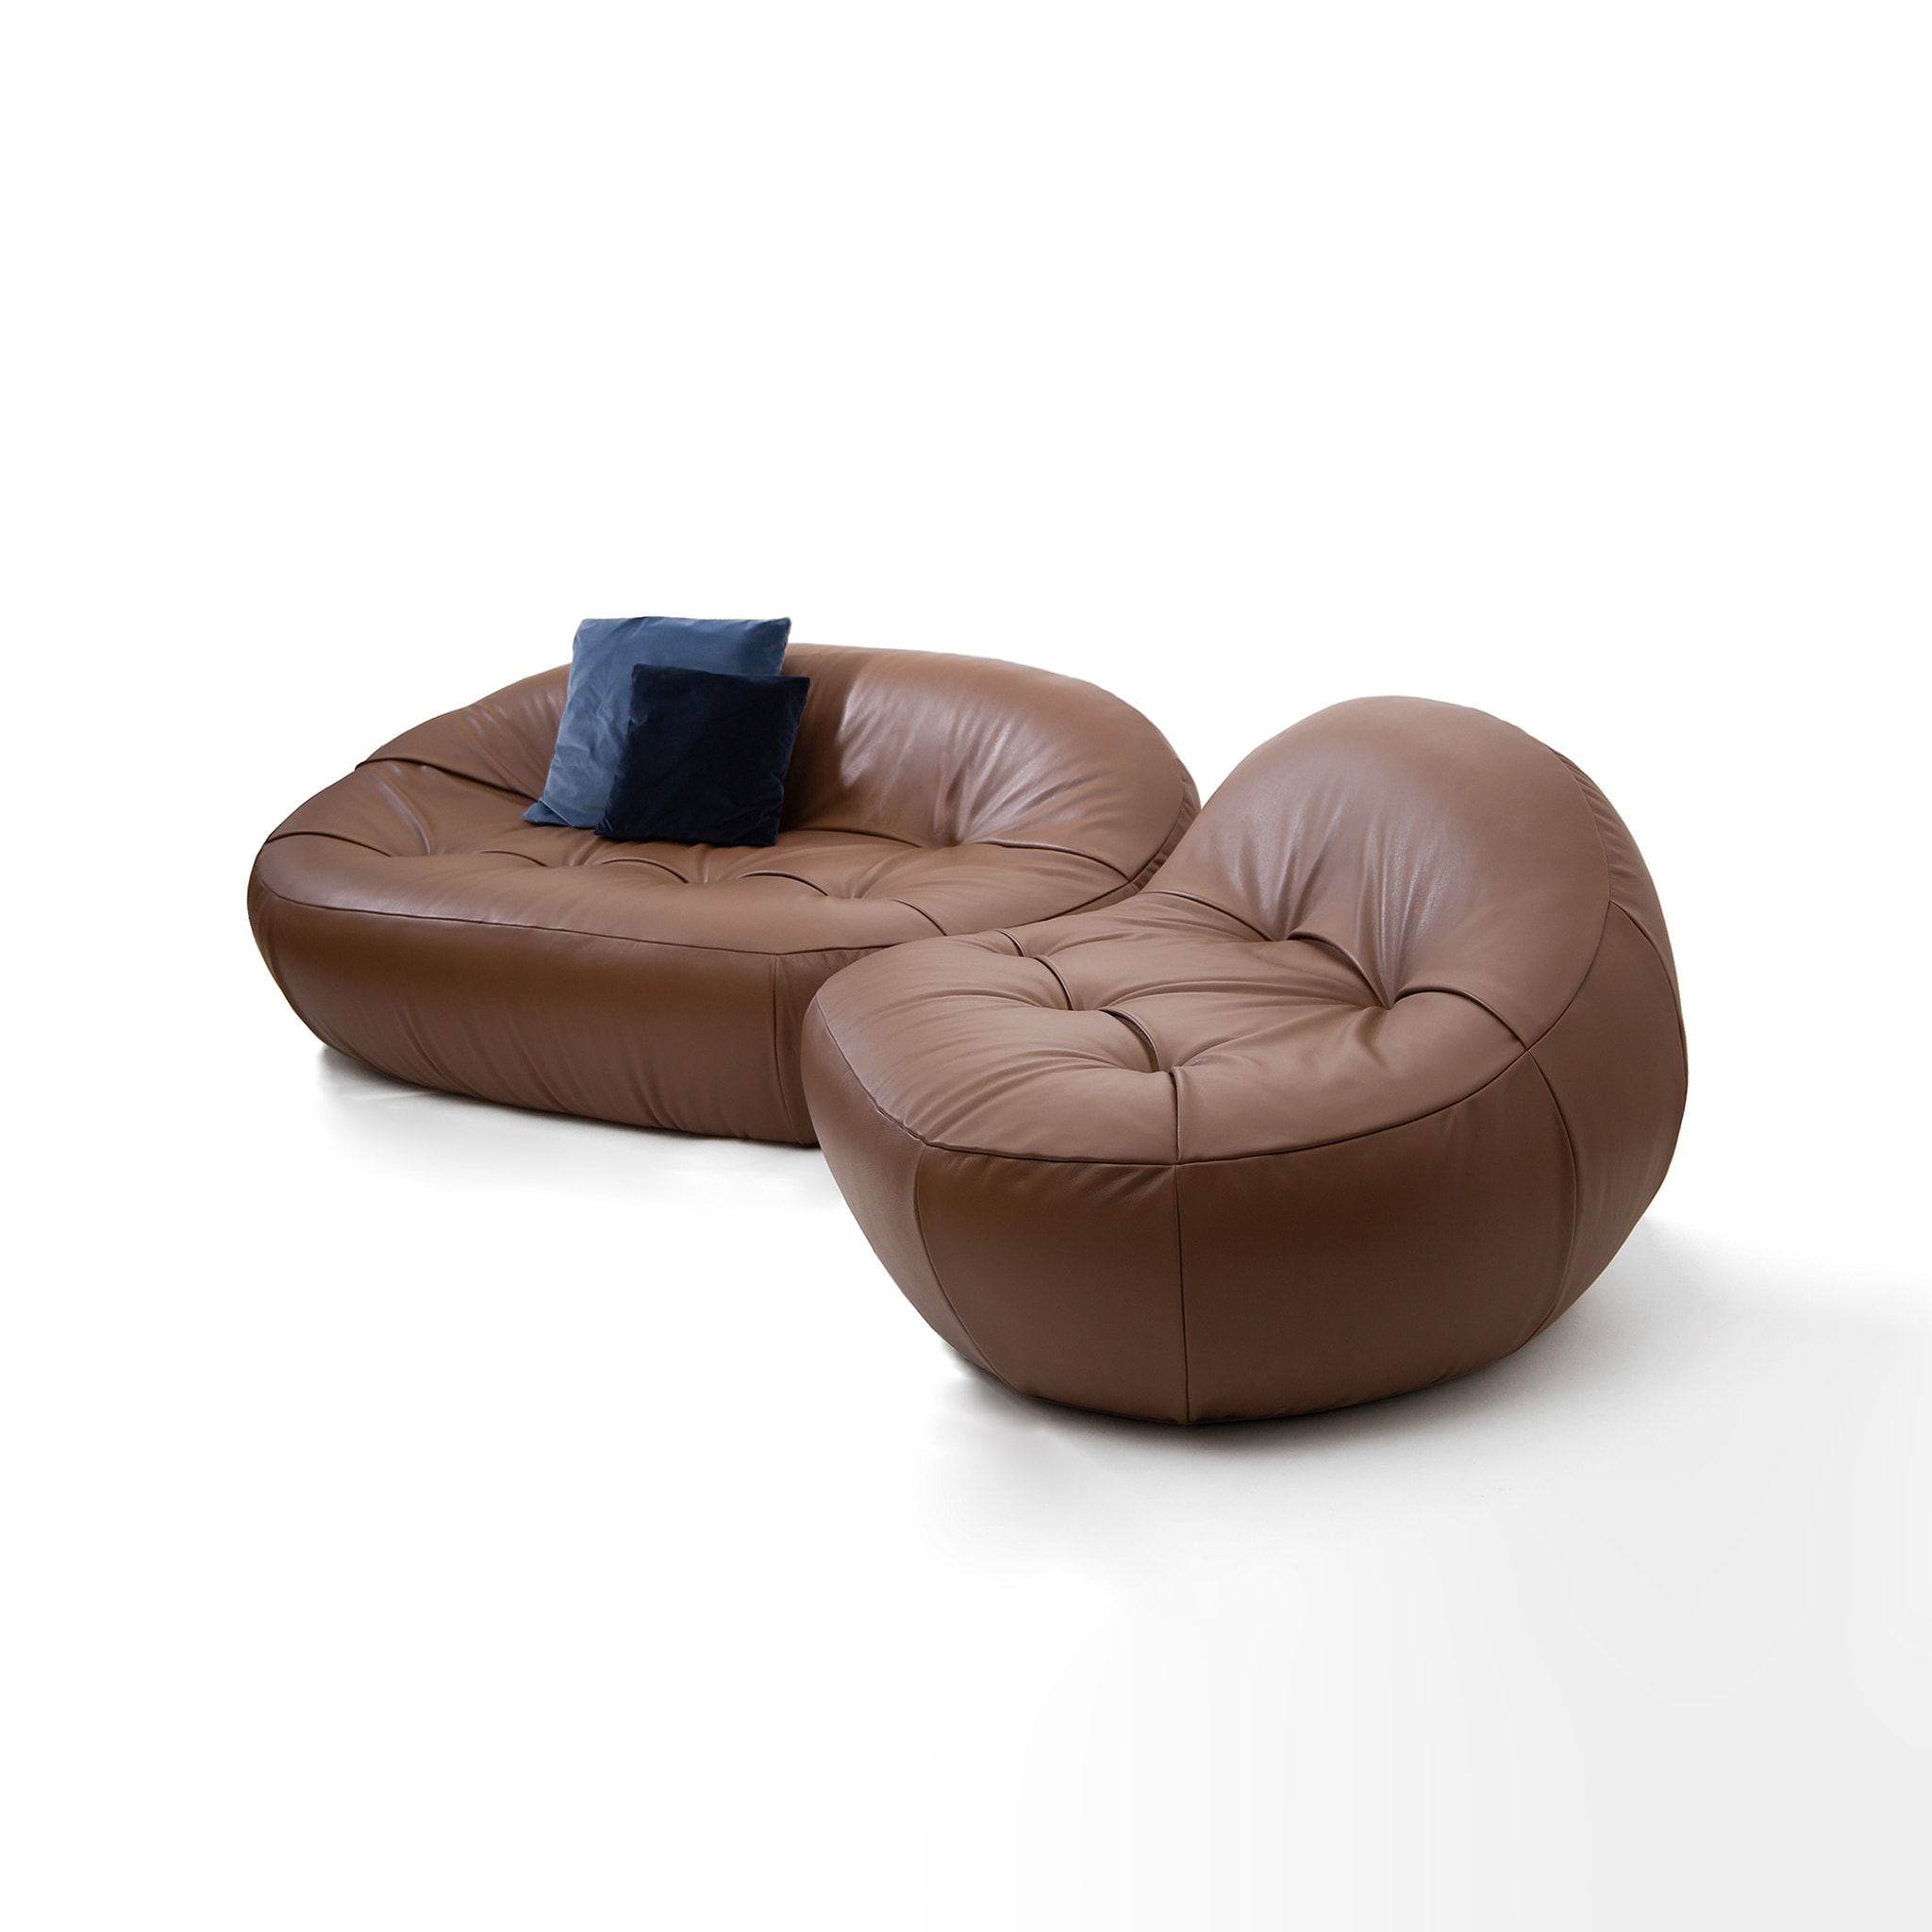 Plumpstones 200/130 Leather Sofa and Armchair - Alternative view 1